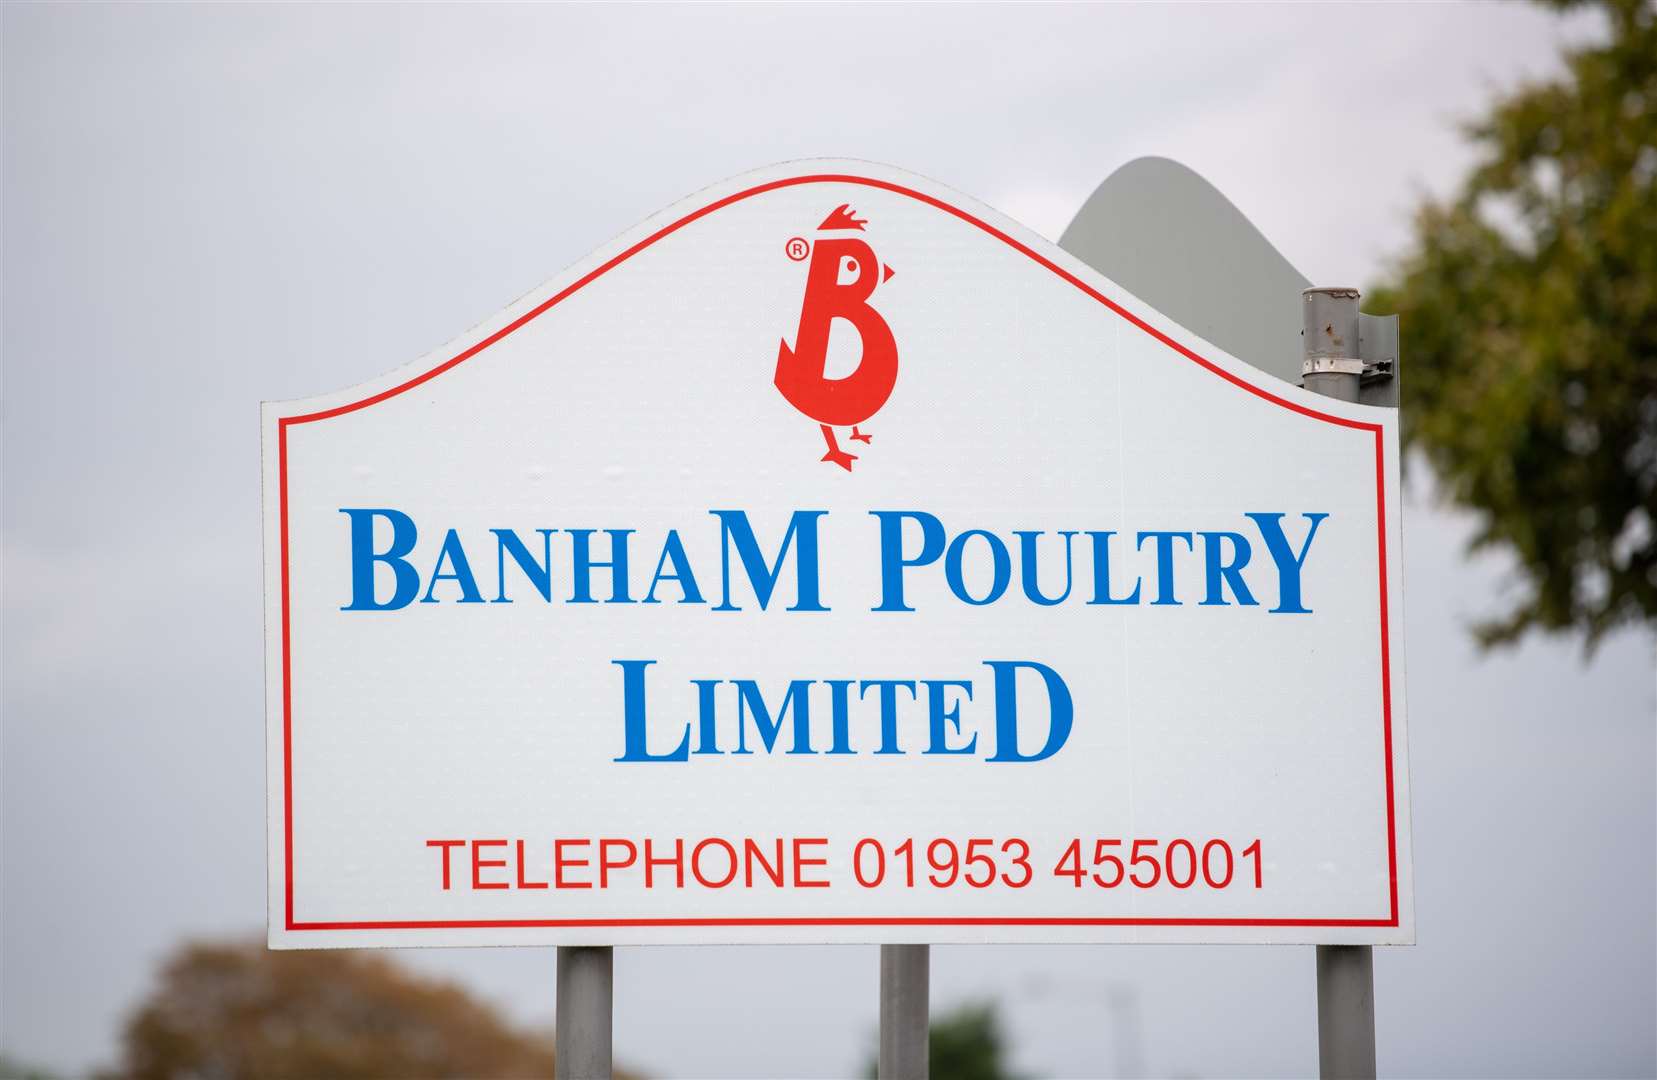 The Environment Secretary said officials are ‘in constant dialogue’ to support Banham Poultry, which has been hit by a Covid-19 outbreak (Joe Giddens/PA)